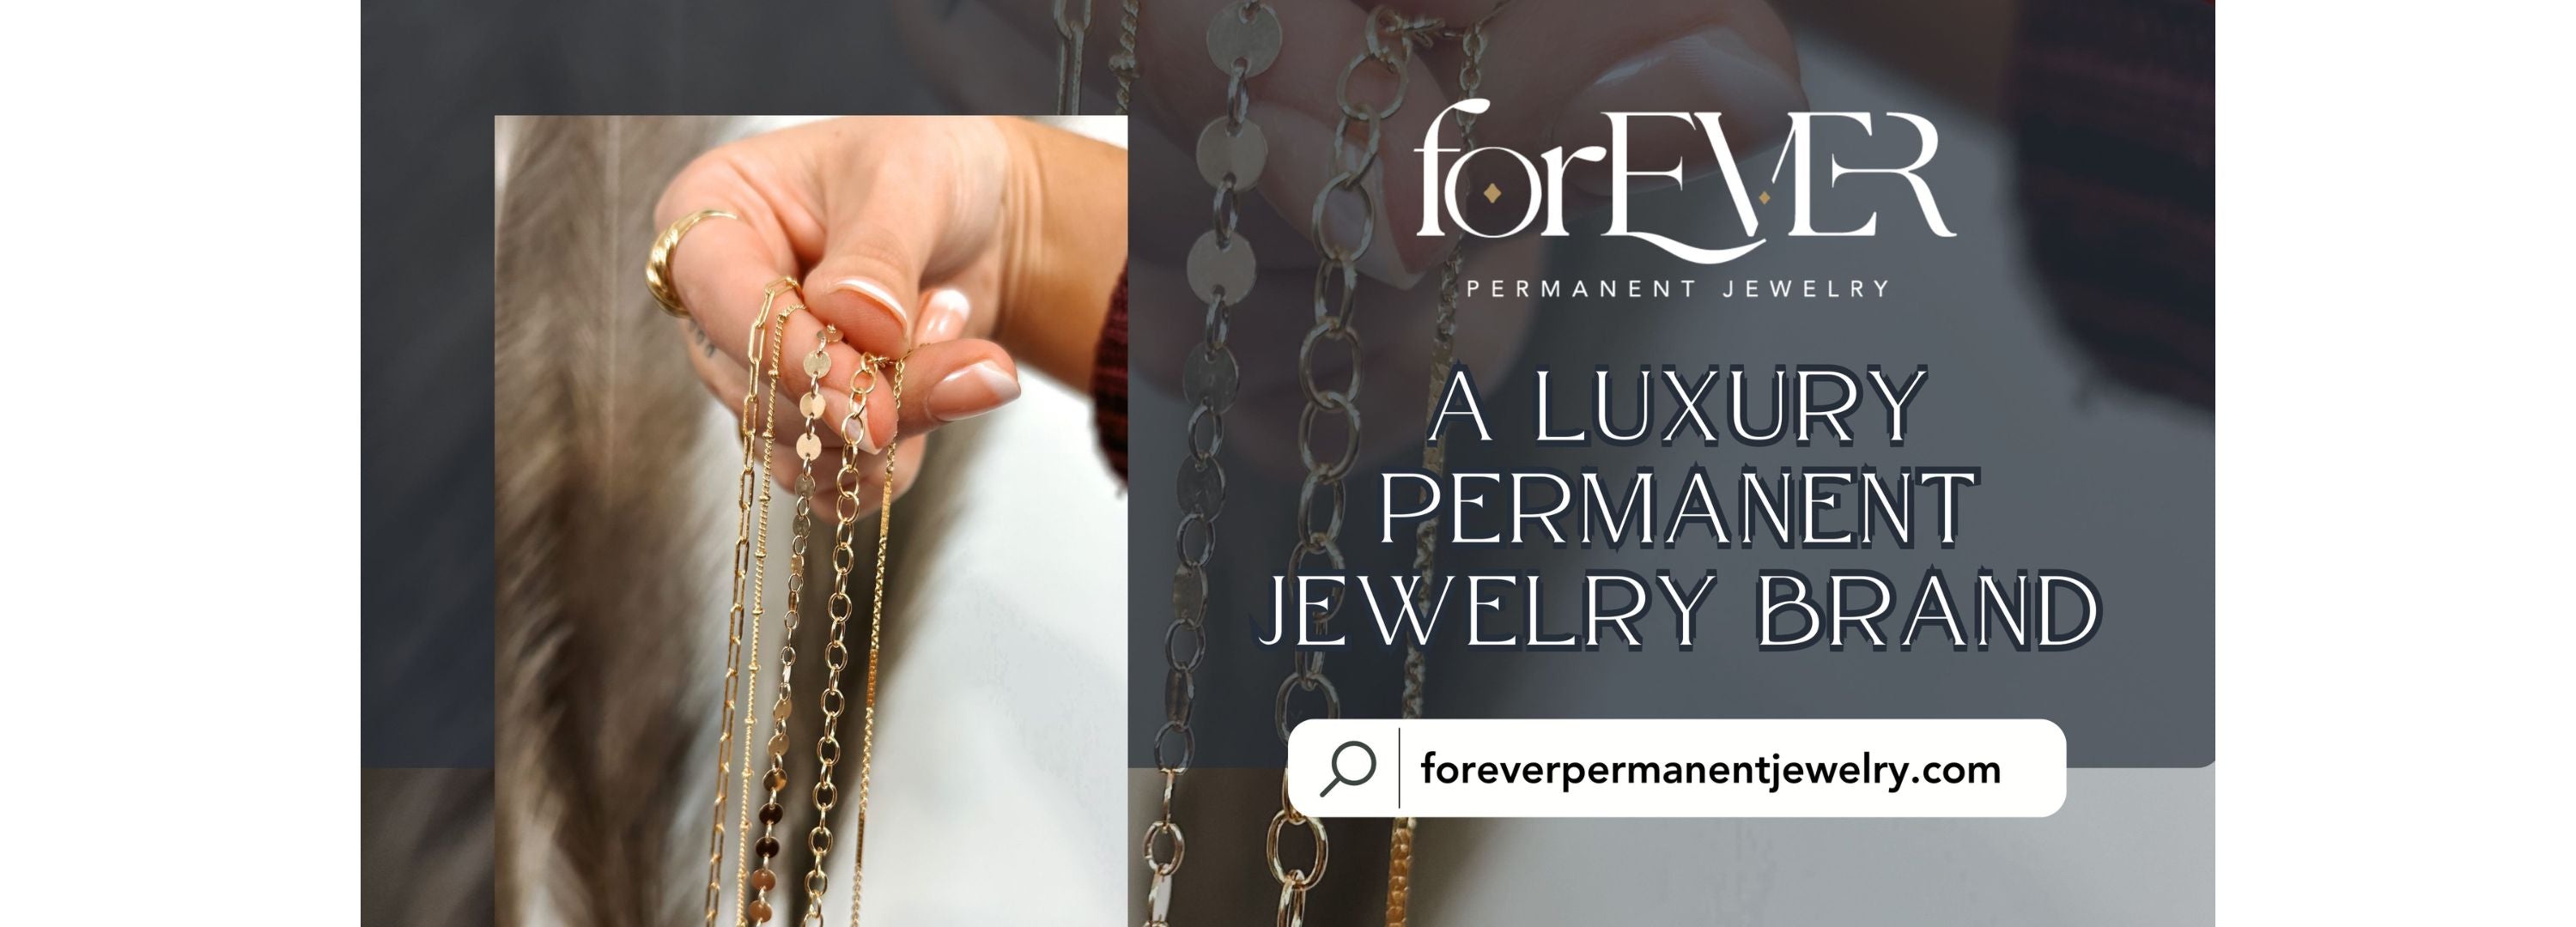 Where to Get a Forever Jewelry Starter Kit